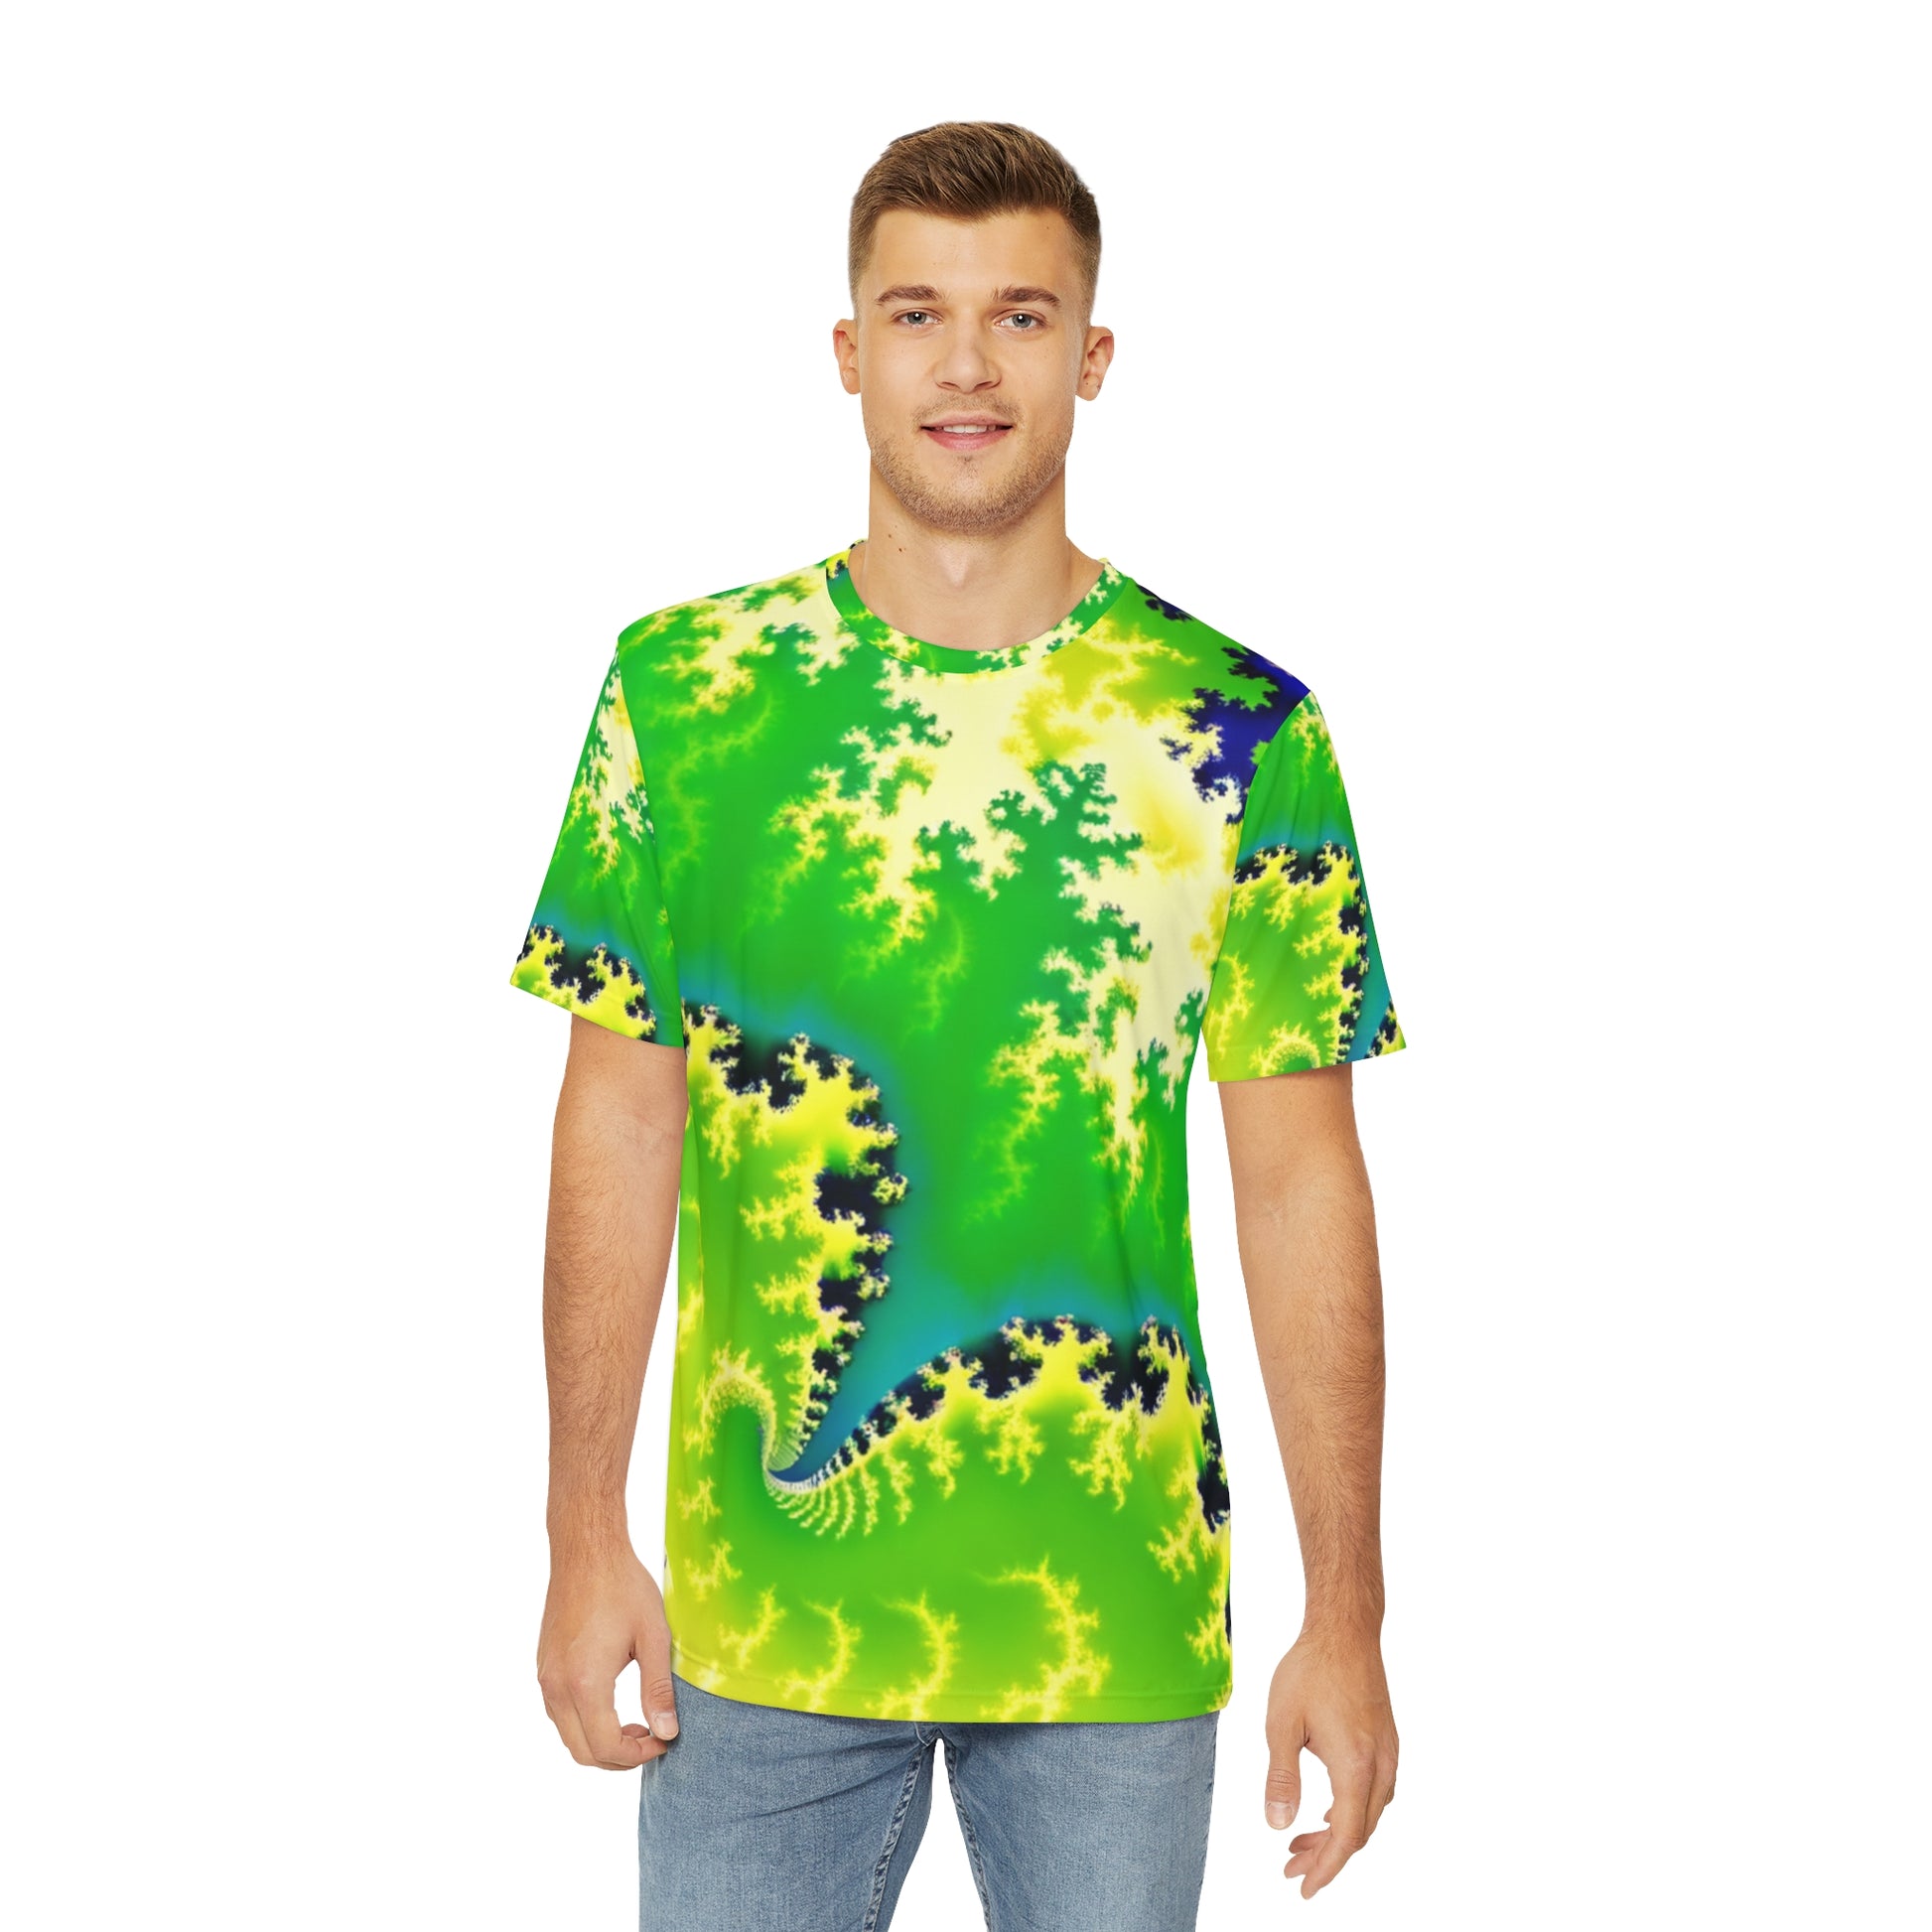 Front view of the Psychedelic Serpentine Fractal Fusion Crewneck Pullover All-Over Print Short-Sleeved Shirt green yellow blue black psychedelic pattern paired with casual denim pants worn by a white man